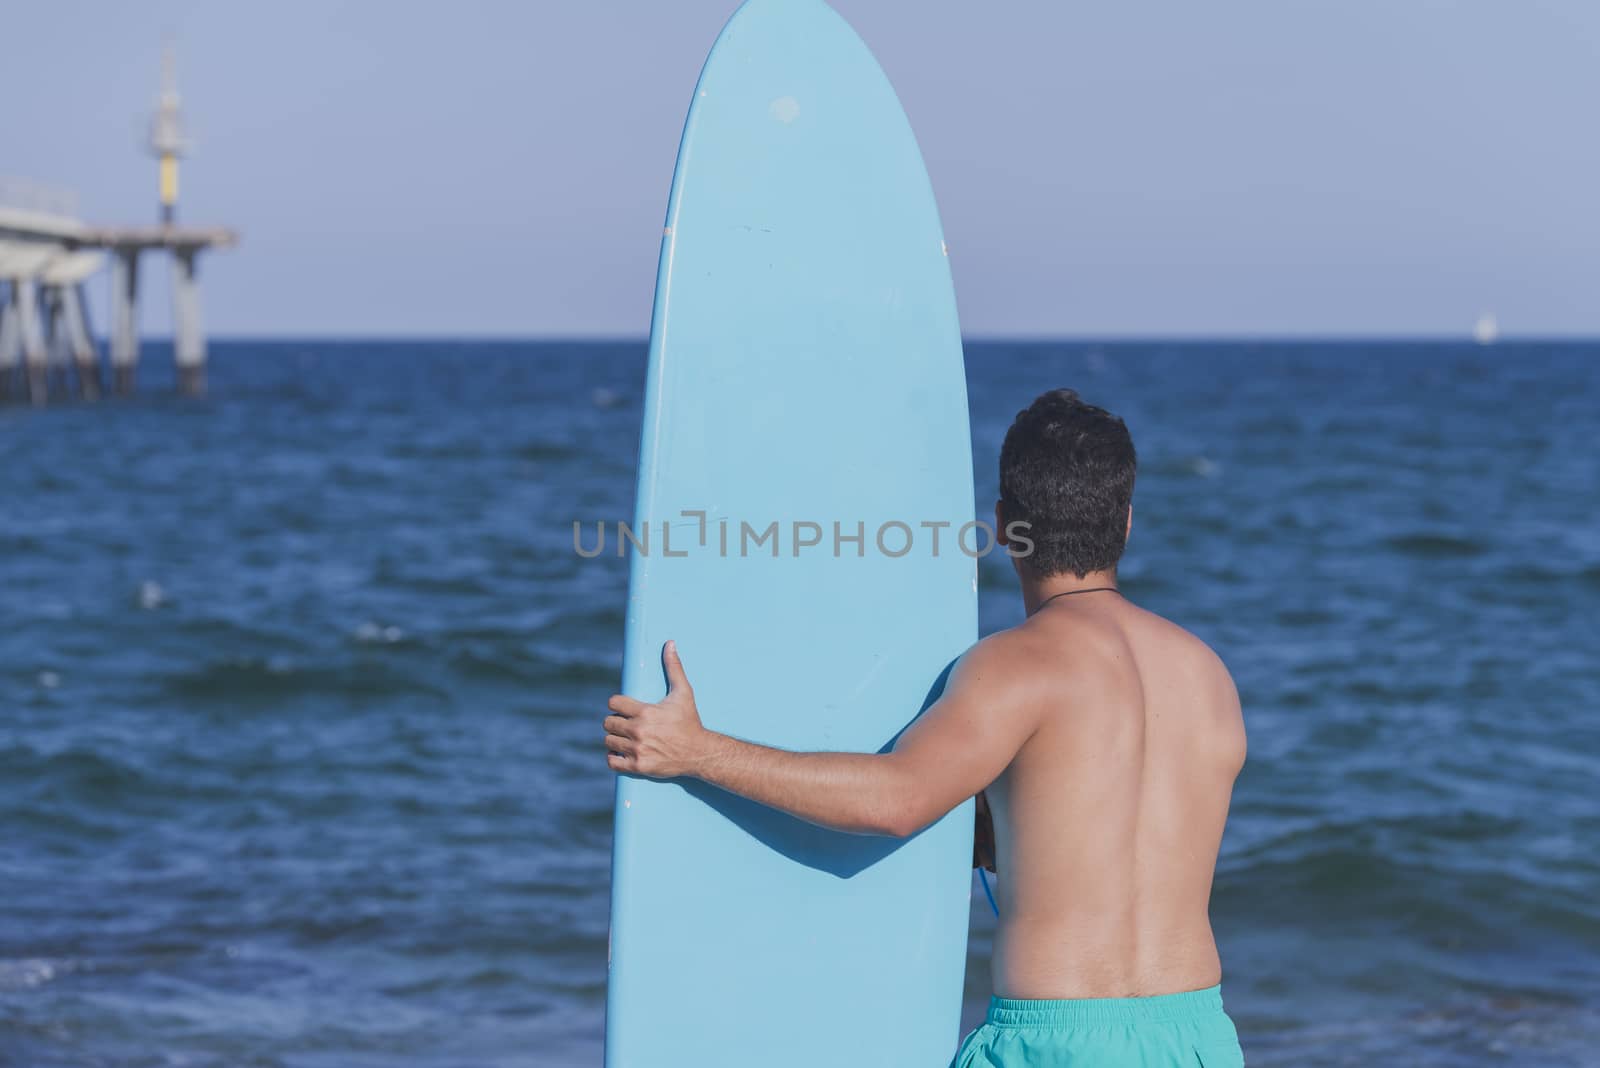 Young attractive surfer holding his surfboard at the beach